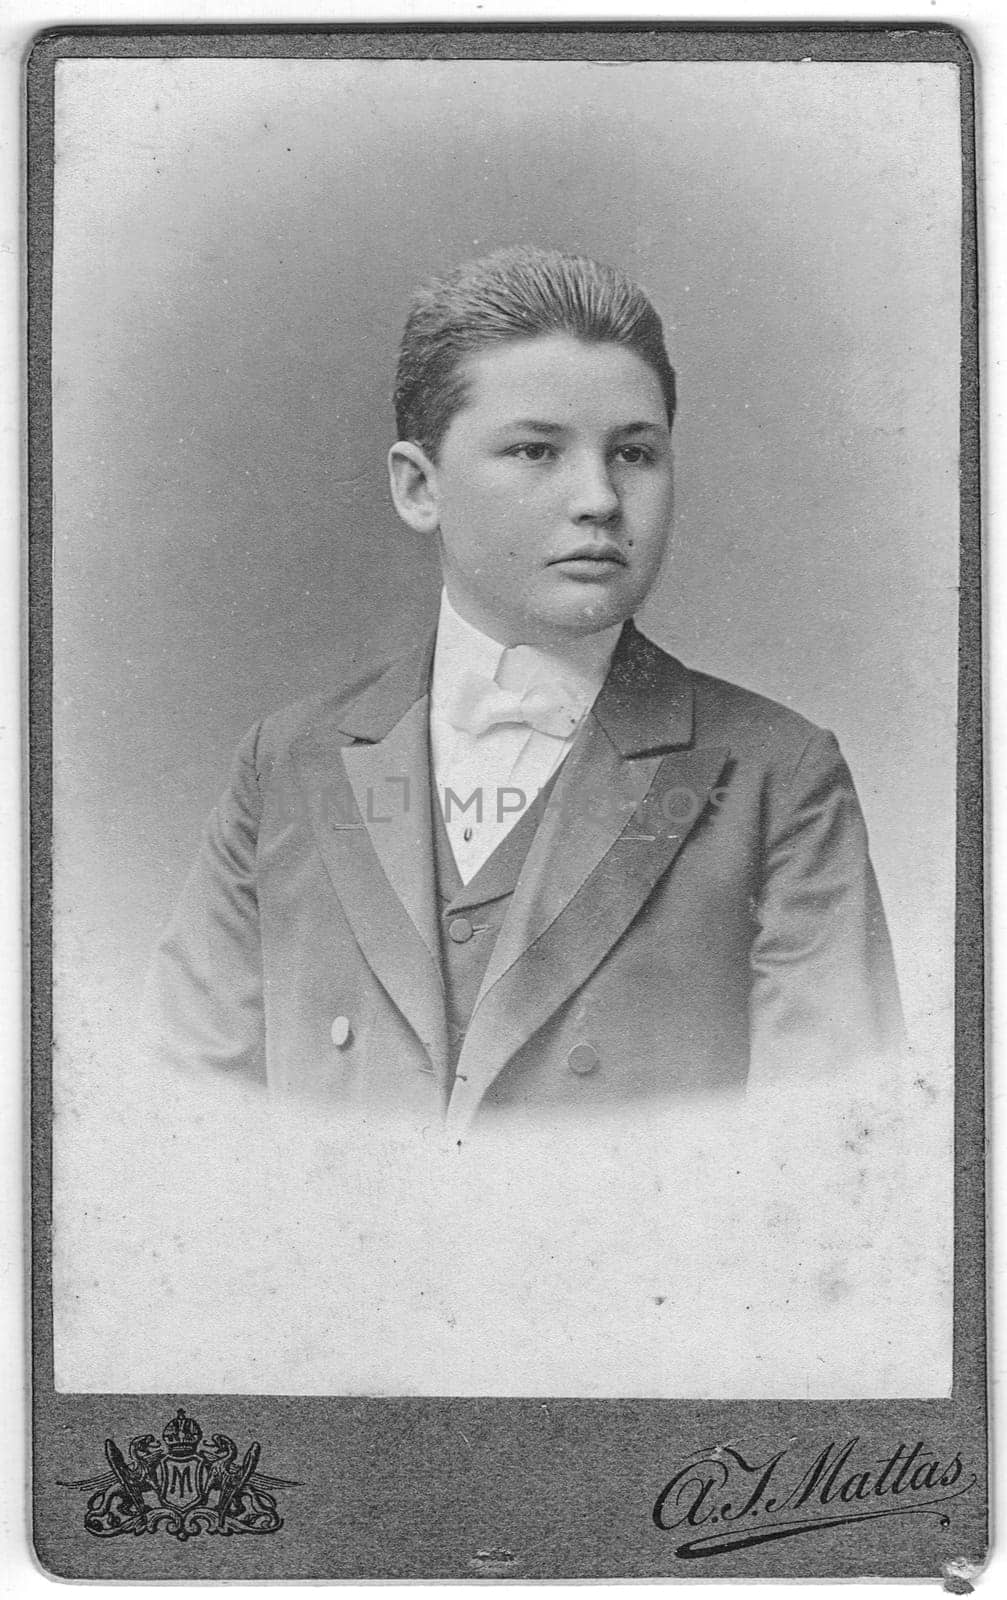 CHRUDIM, AUSTRIA - HUNGARY - CIRCA 1910: Vintage cabinet card shows portrait of the young man wearing bow tie. Photo was taken in a photo studio. Edwardian era. Photo was taken in Austro-Hungarian Empire or also Austro-Hungarian Monarchy.